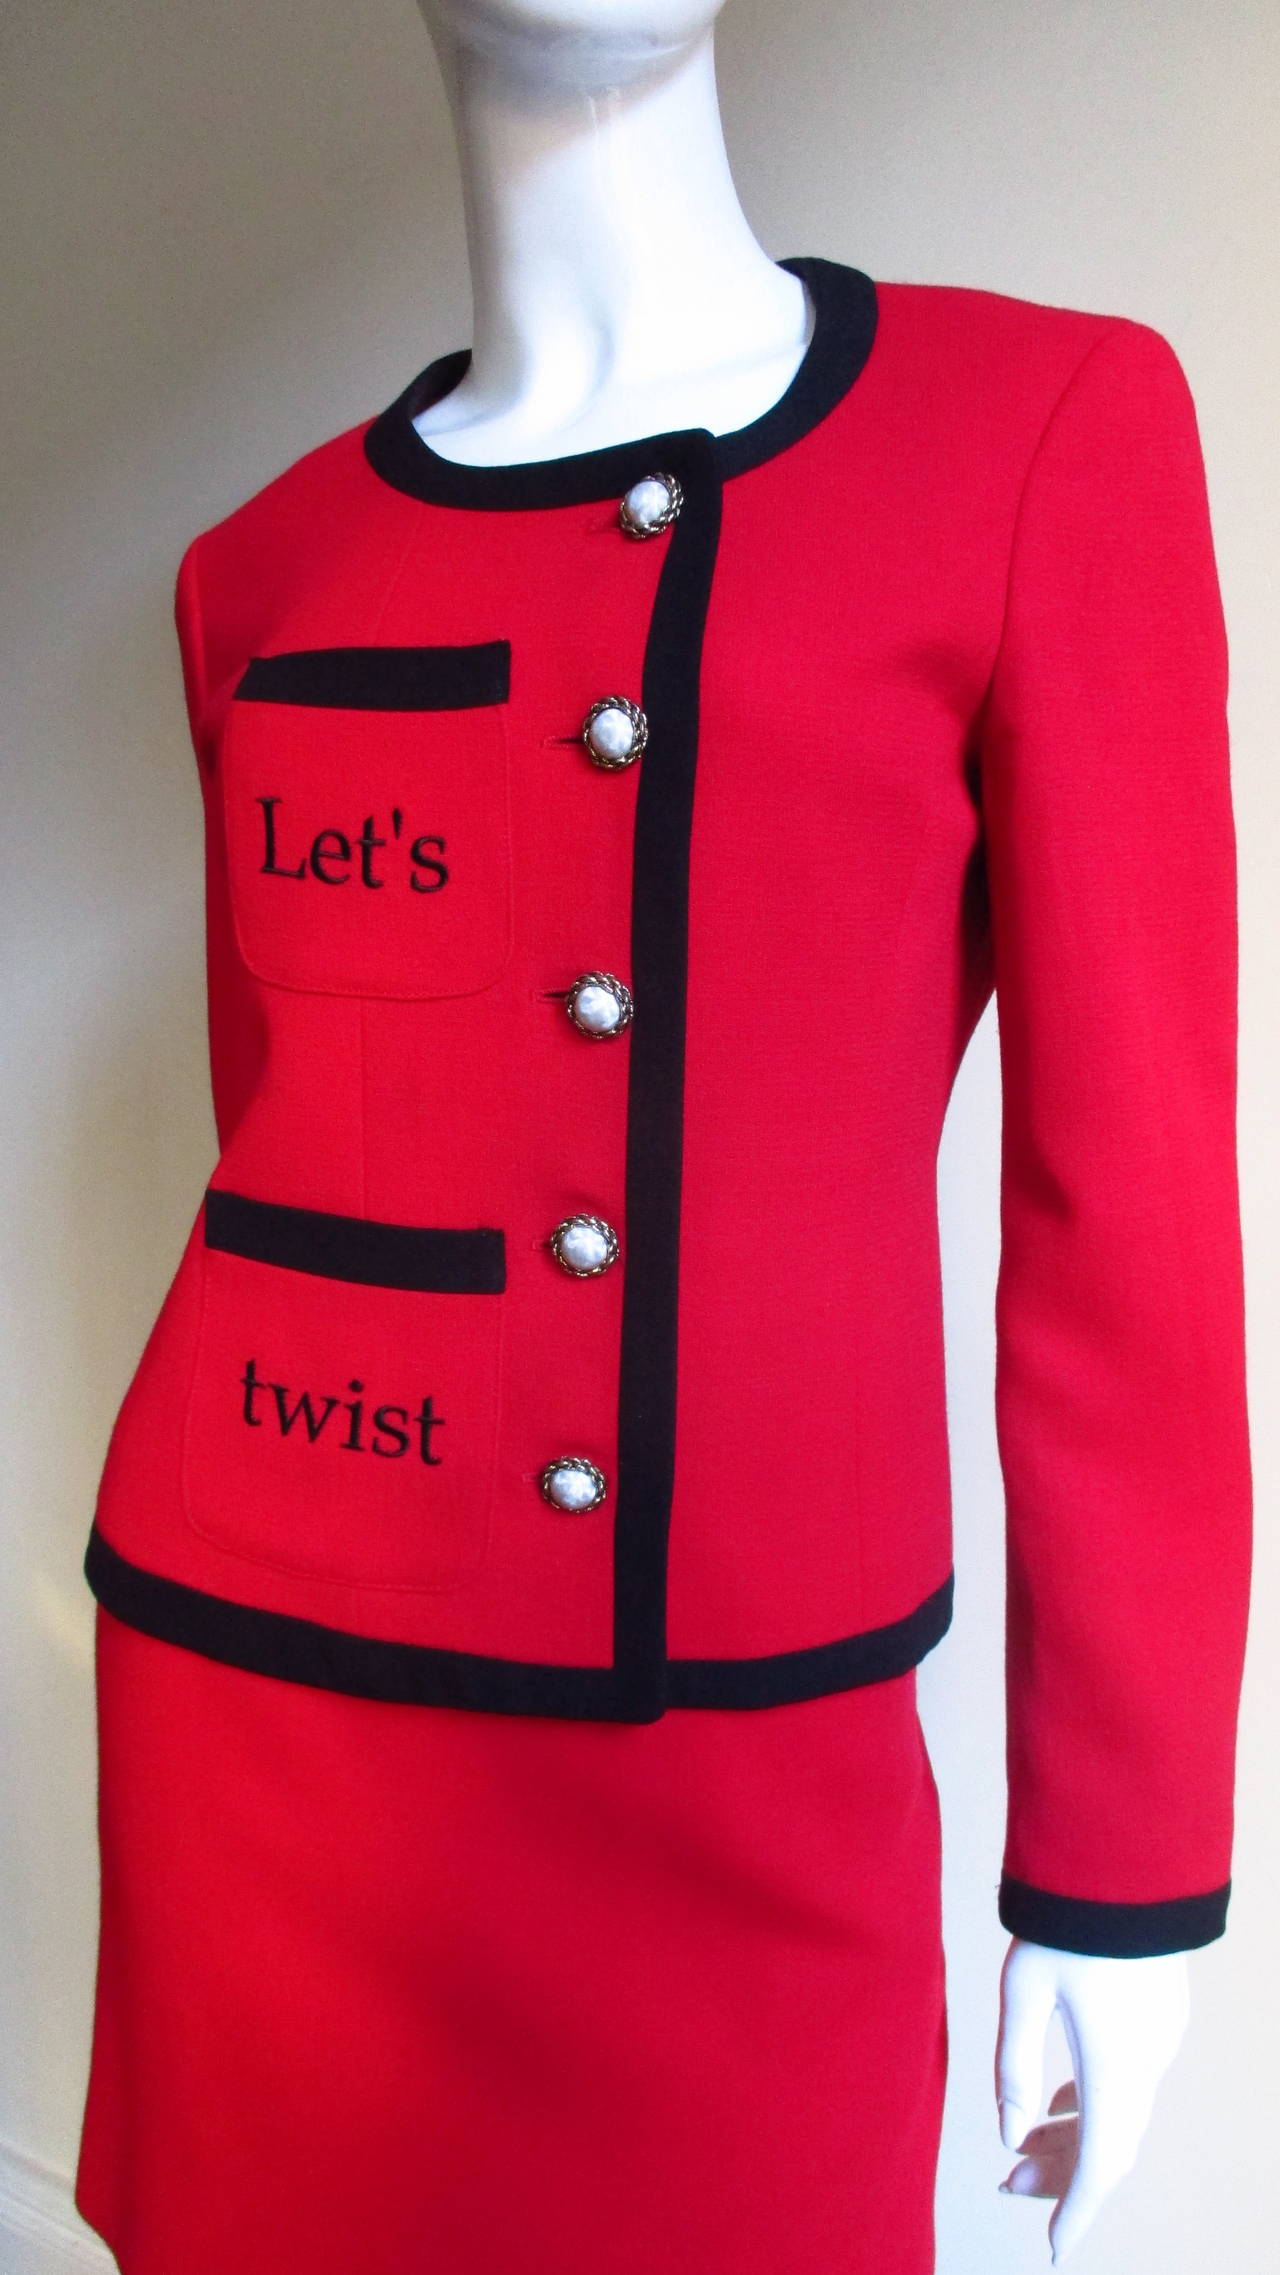 A fabulous red light weight wool suit from Moschino. The simple jacket closes off center with 5 faux pearl buttons.  The other side has 2 pockets one above the other with the words 'Let's' and 'twist' embroidered in black on each.  The back has the